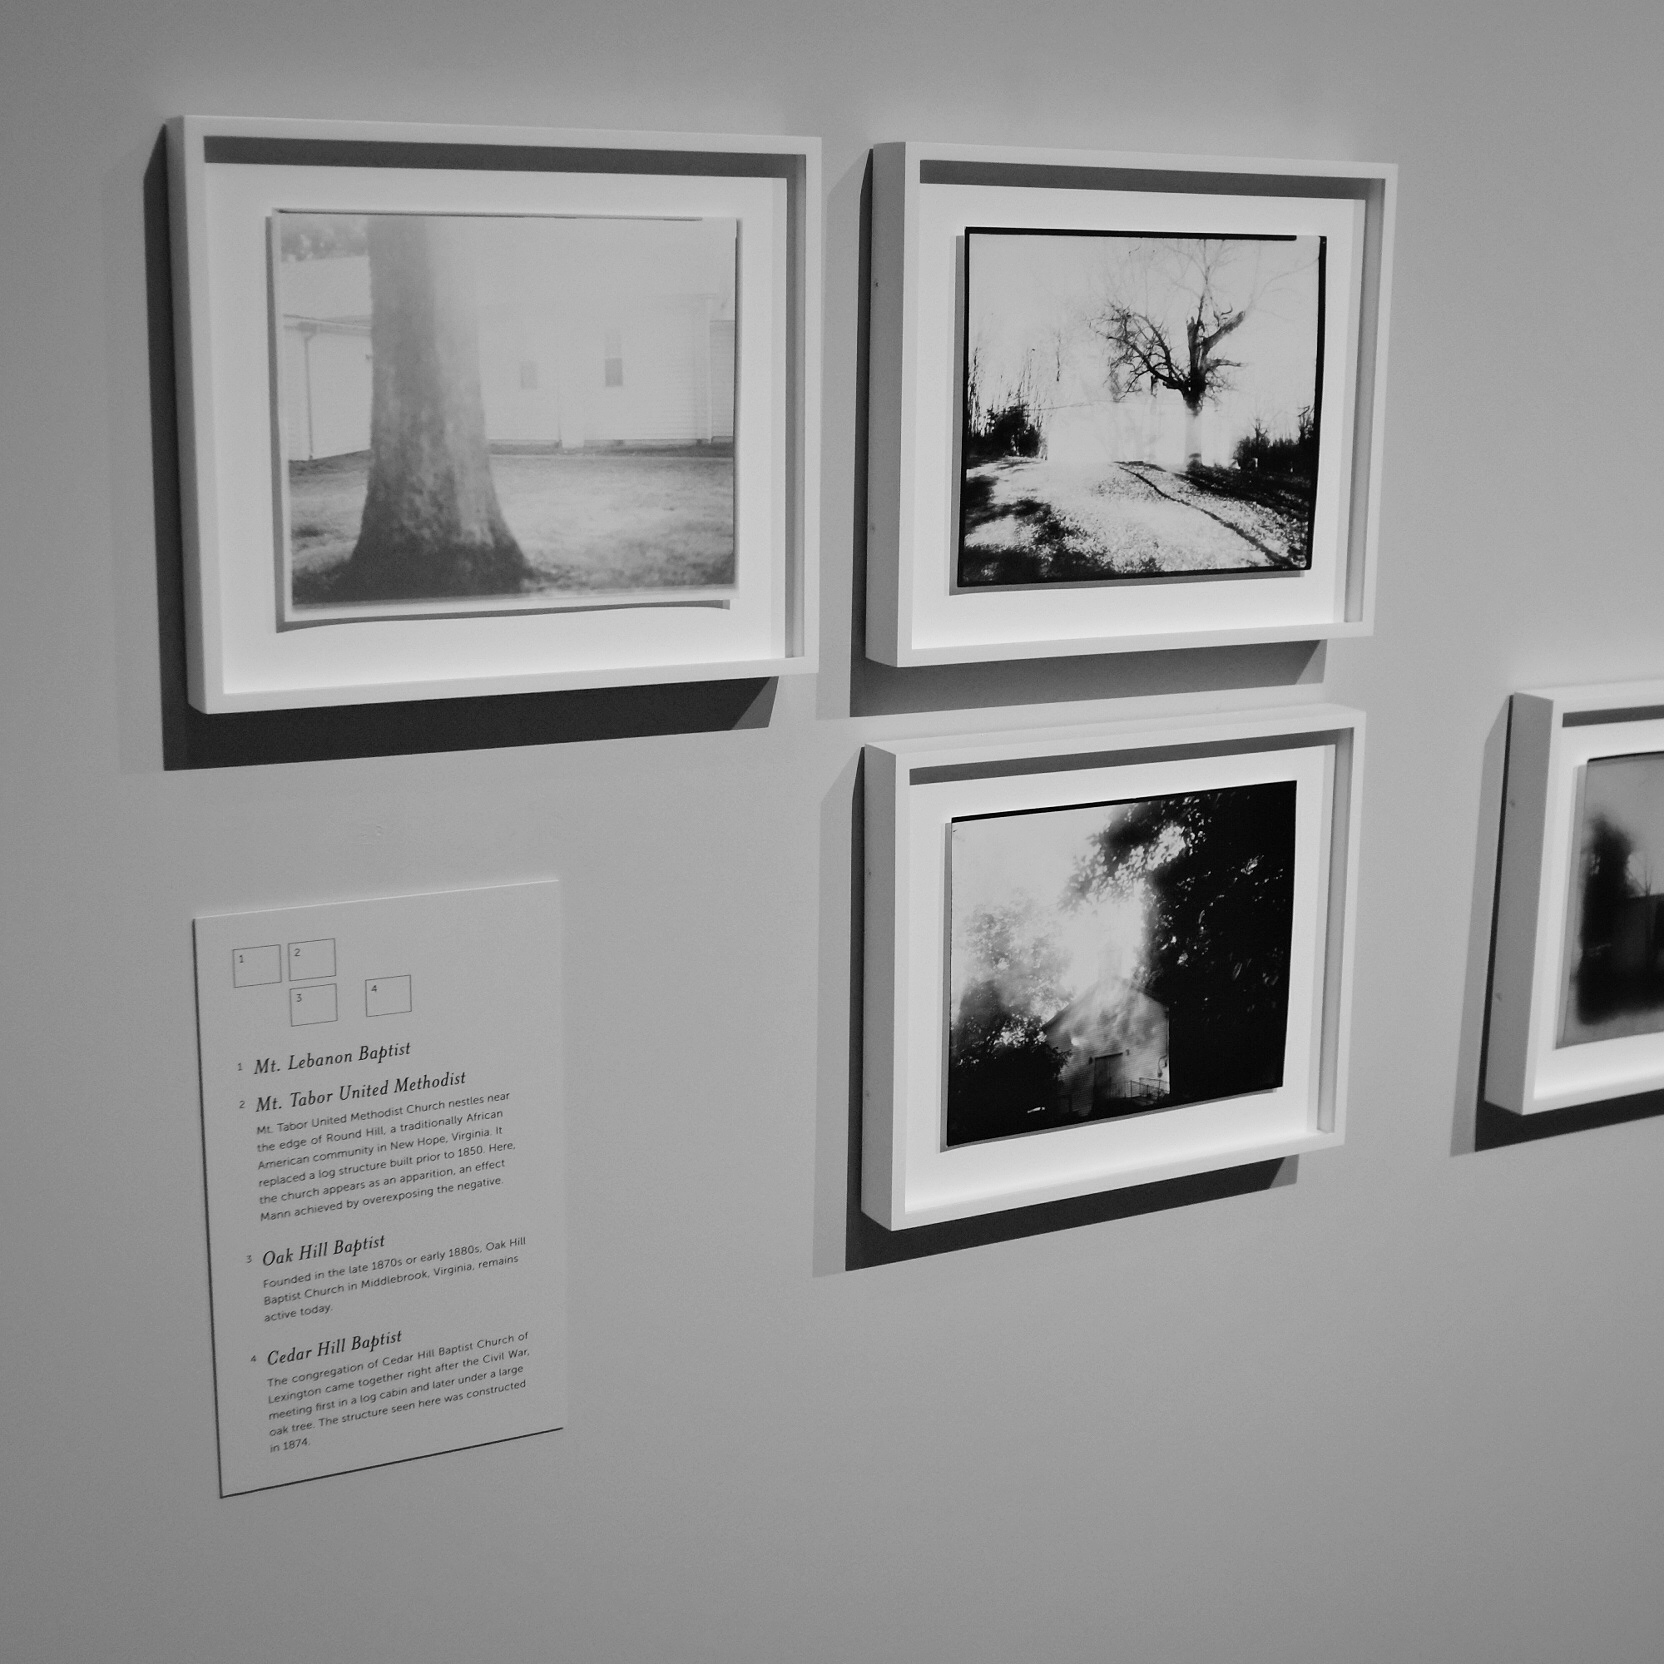 Sally Mann: A Thousand Crossings, Peabody Essex Museum